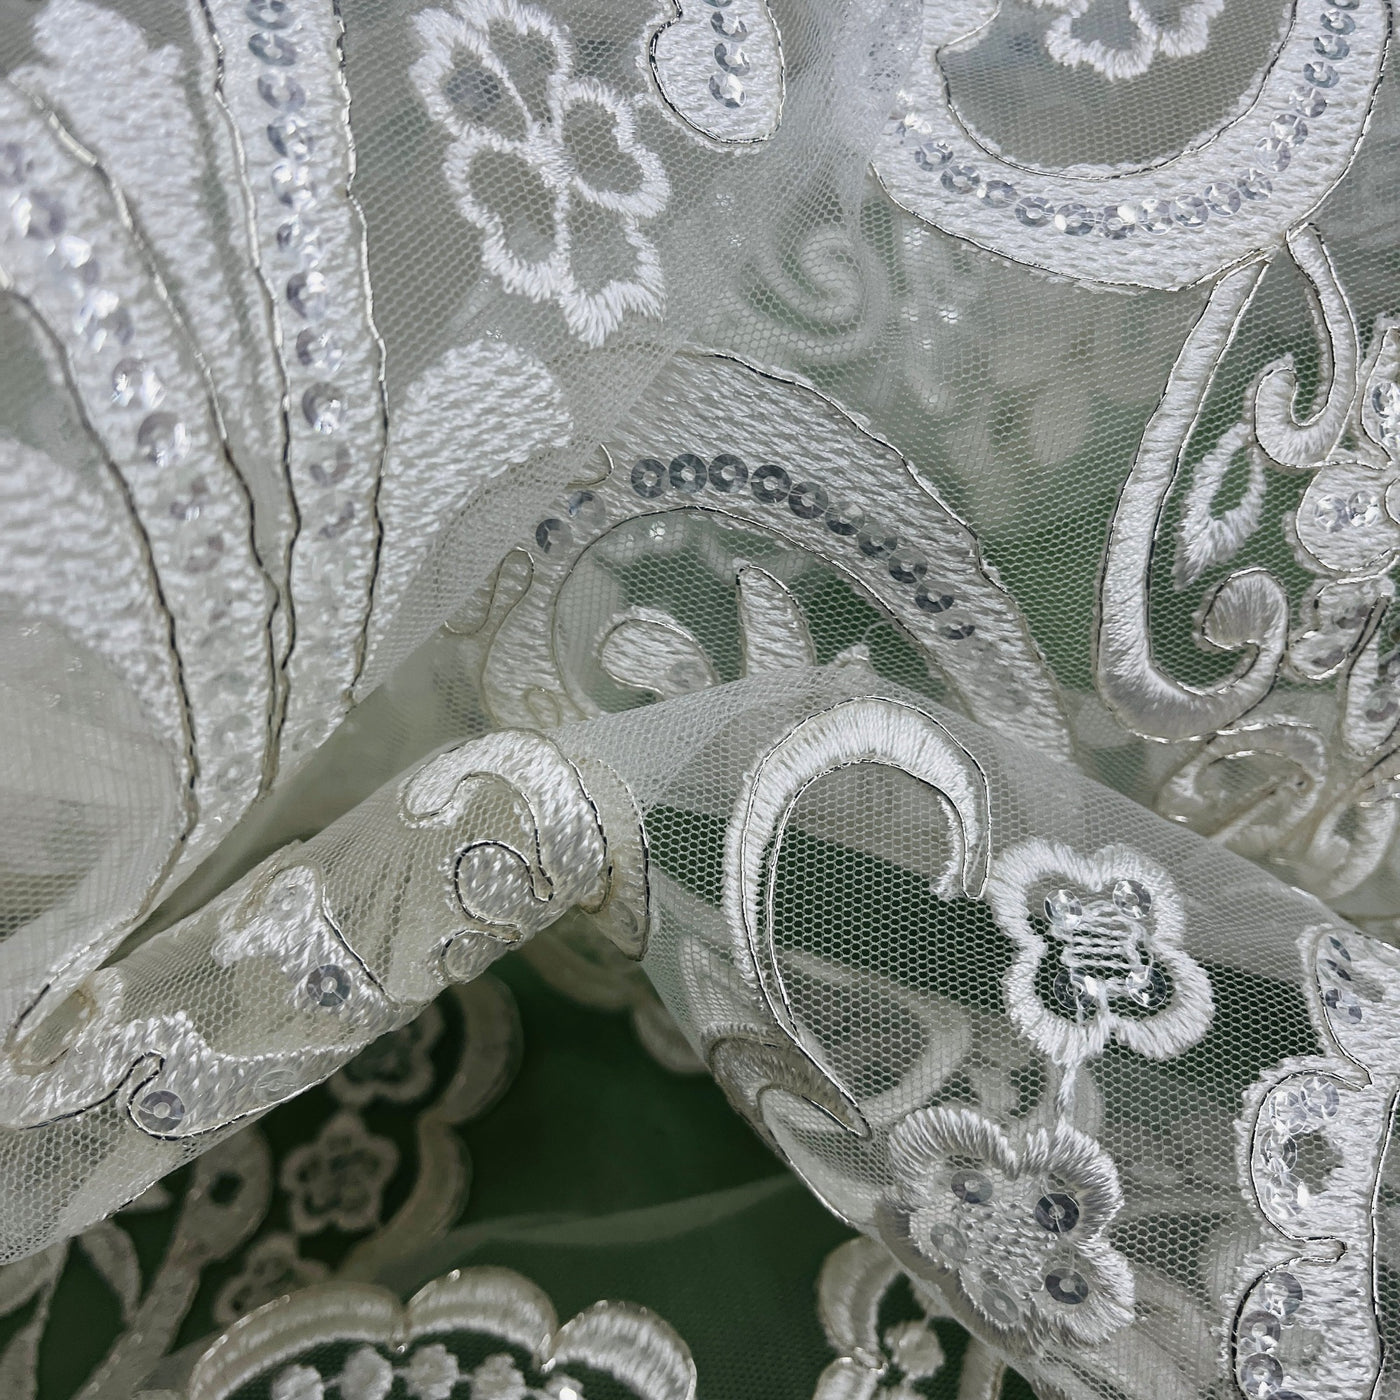 Beaded & Corded Bridal Lace Fabric Embroidered on 100% Polyester Net Mesh | Lace USA - 97068W-SB Ivory with Silver